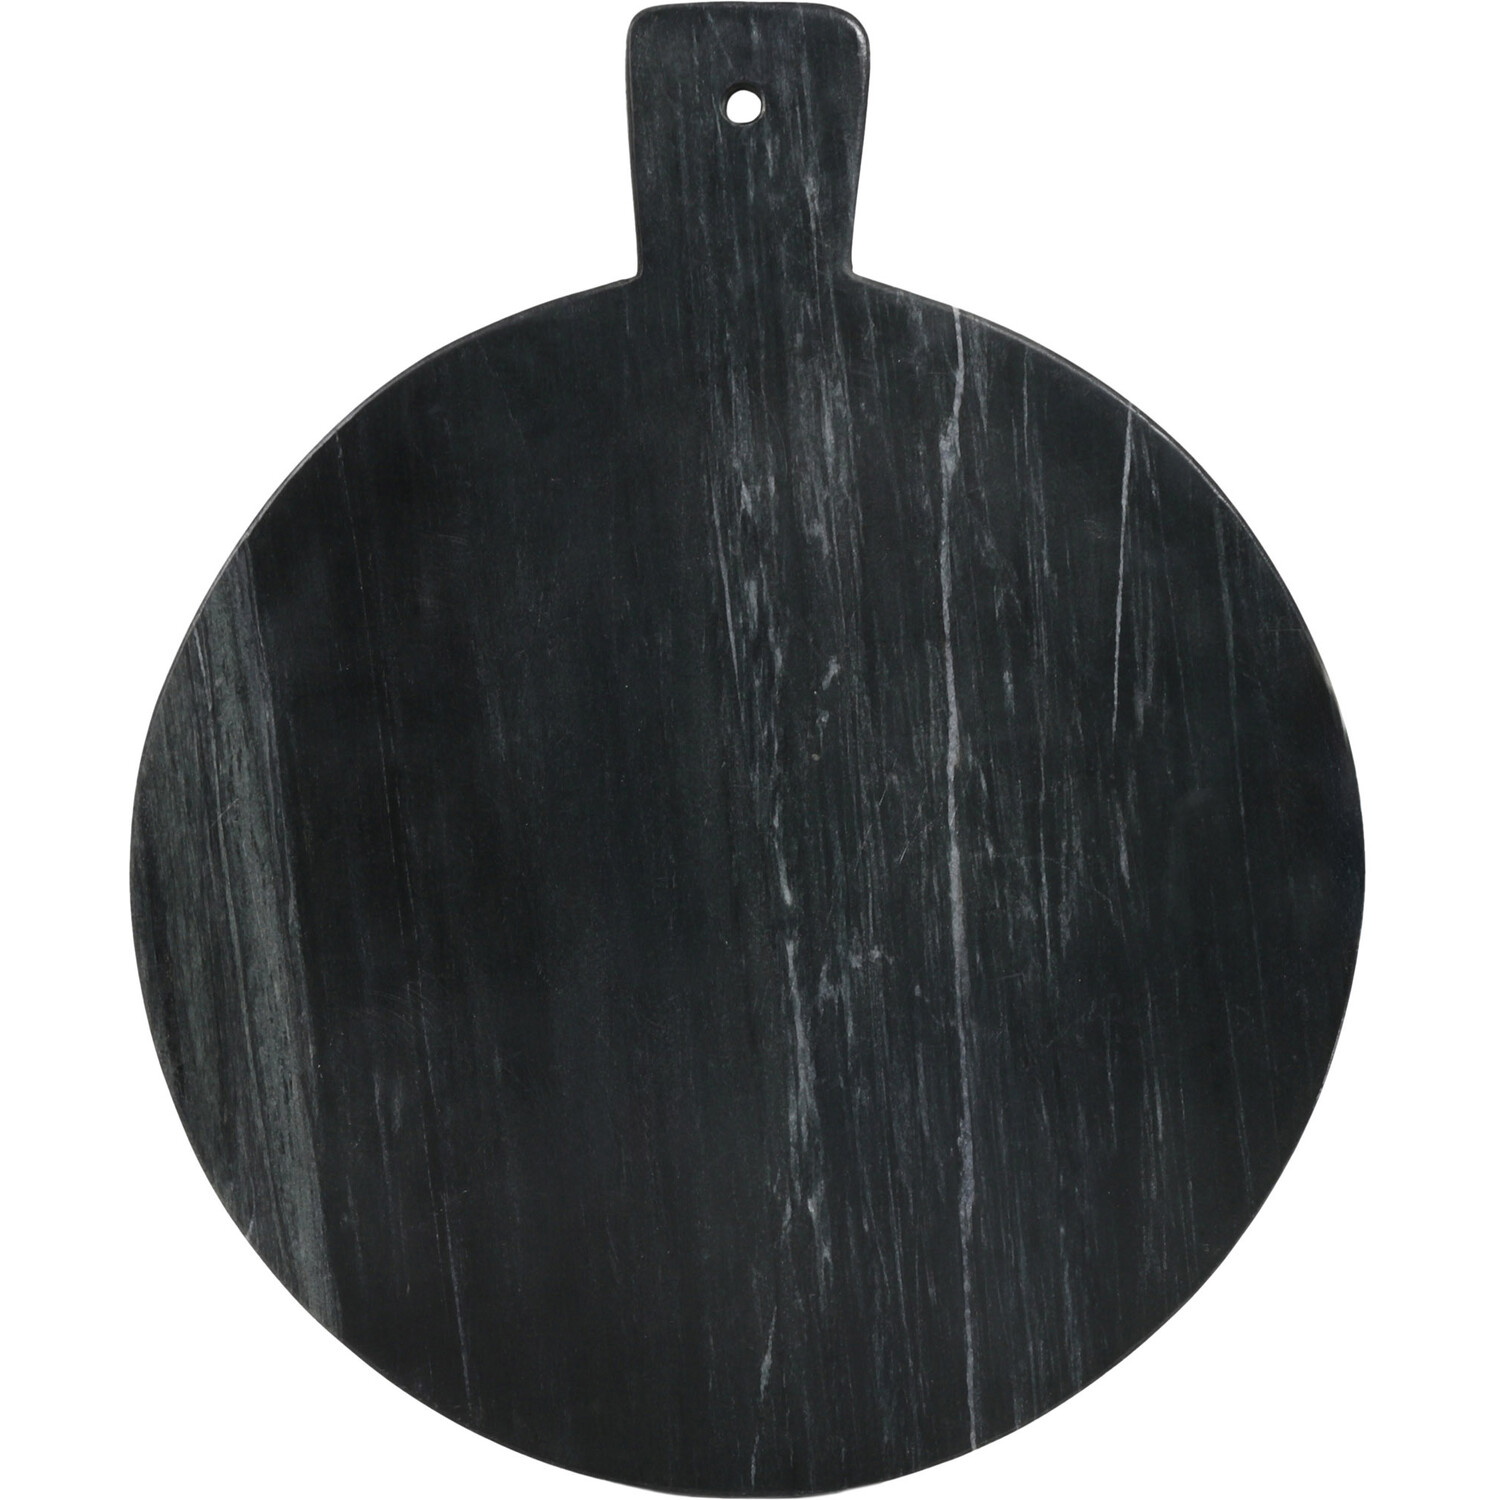 Marine Marble Round Board With Handle - Black Image 1